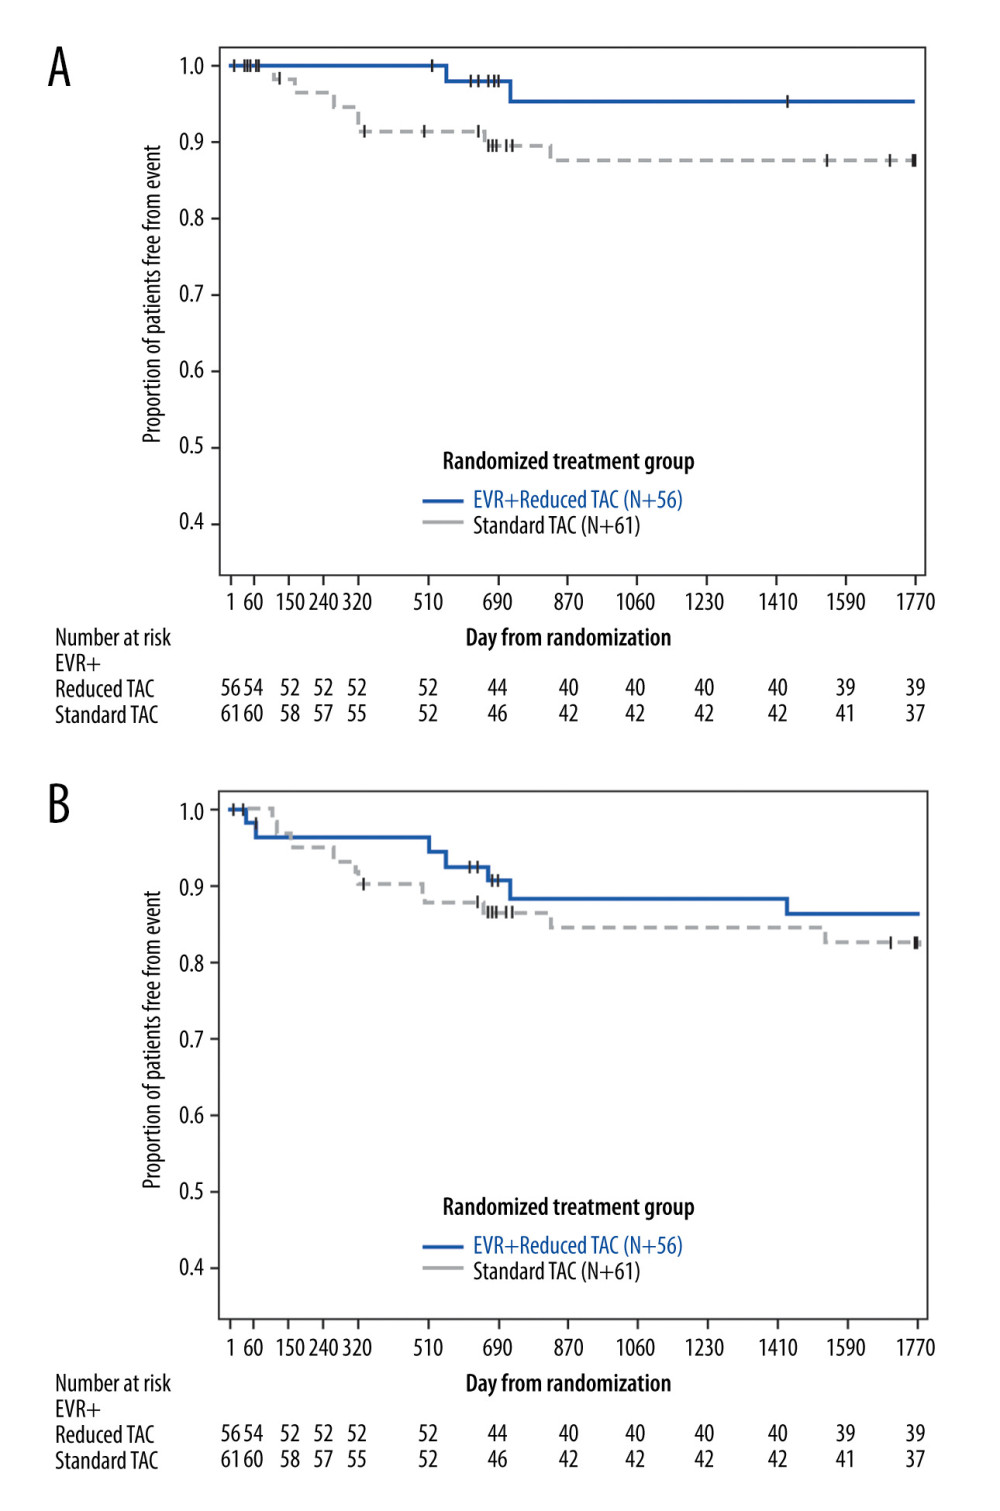 Kaplan-Meier plot for proportion of patients (ITT population) free from HCC recurrence (A) and free from HCC recurrence or death (B). EVR+rTAC – everolimus plus reduced tacrolimus; HCC – hepatocellular carcinoma; ITT – intent-to-treat; sTAC – standard tacrolimus. Created using SAS version 9.4.